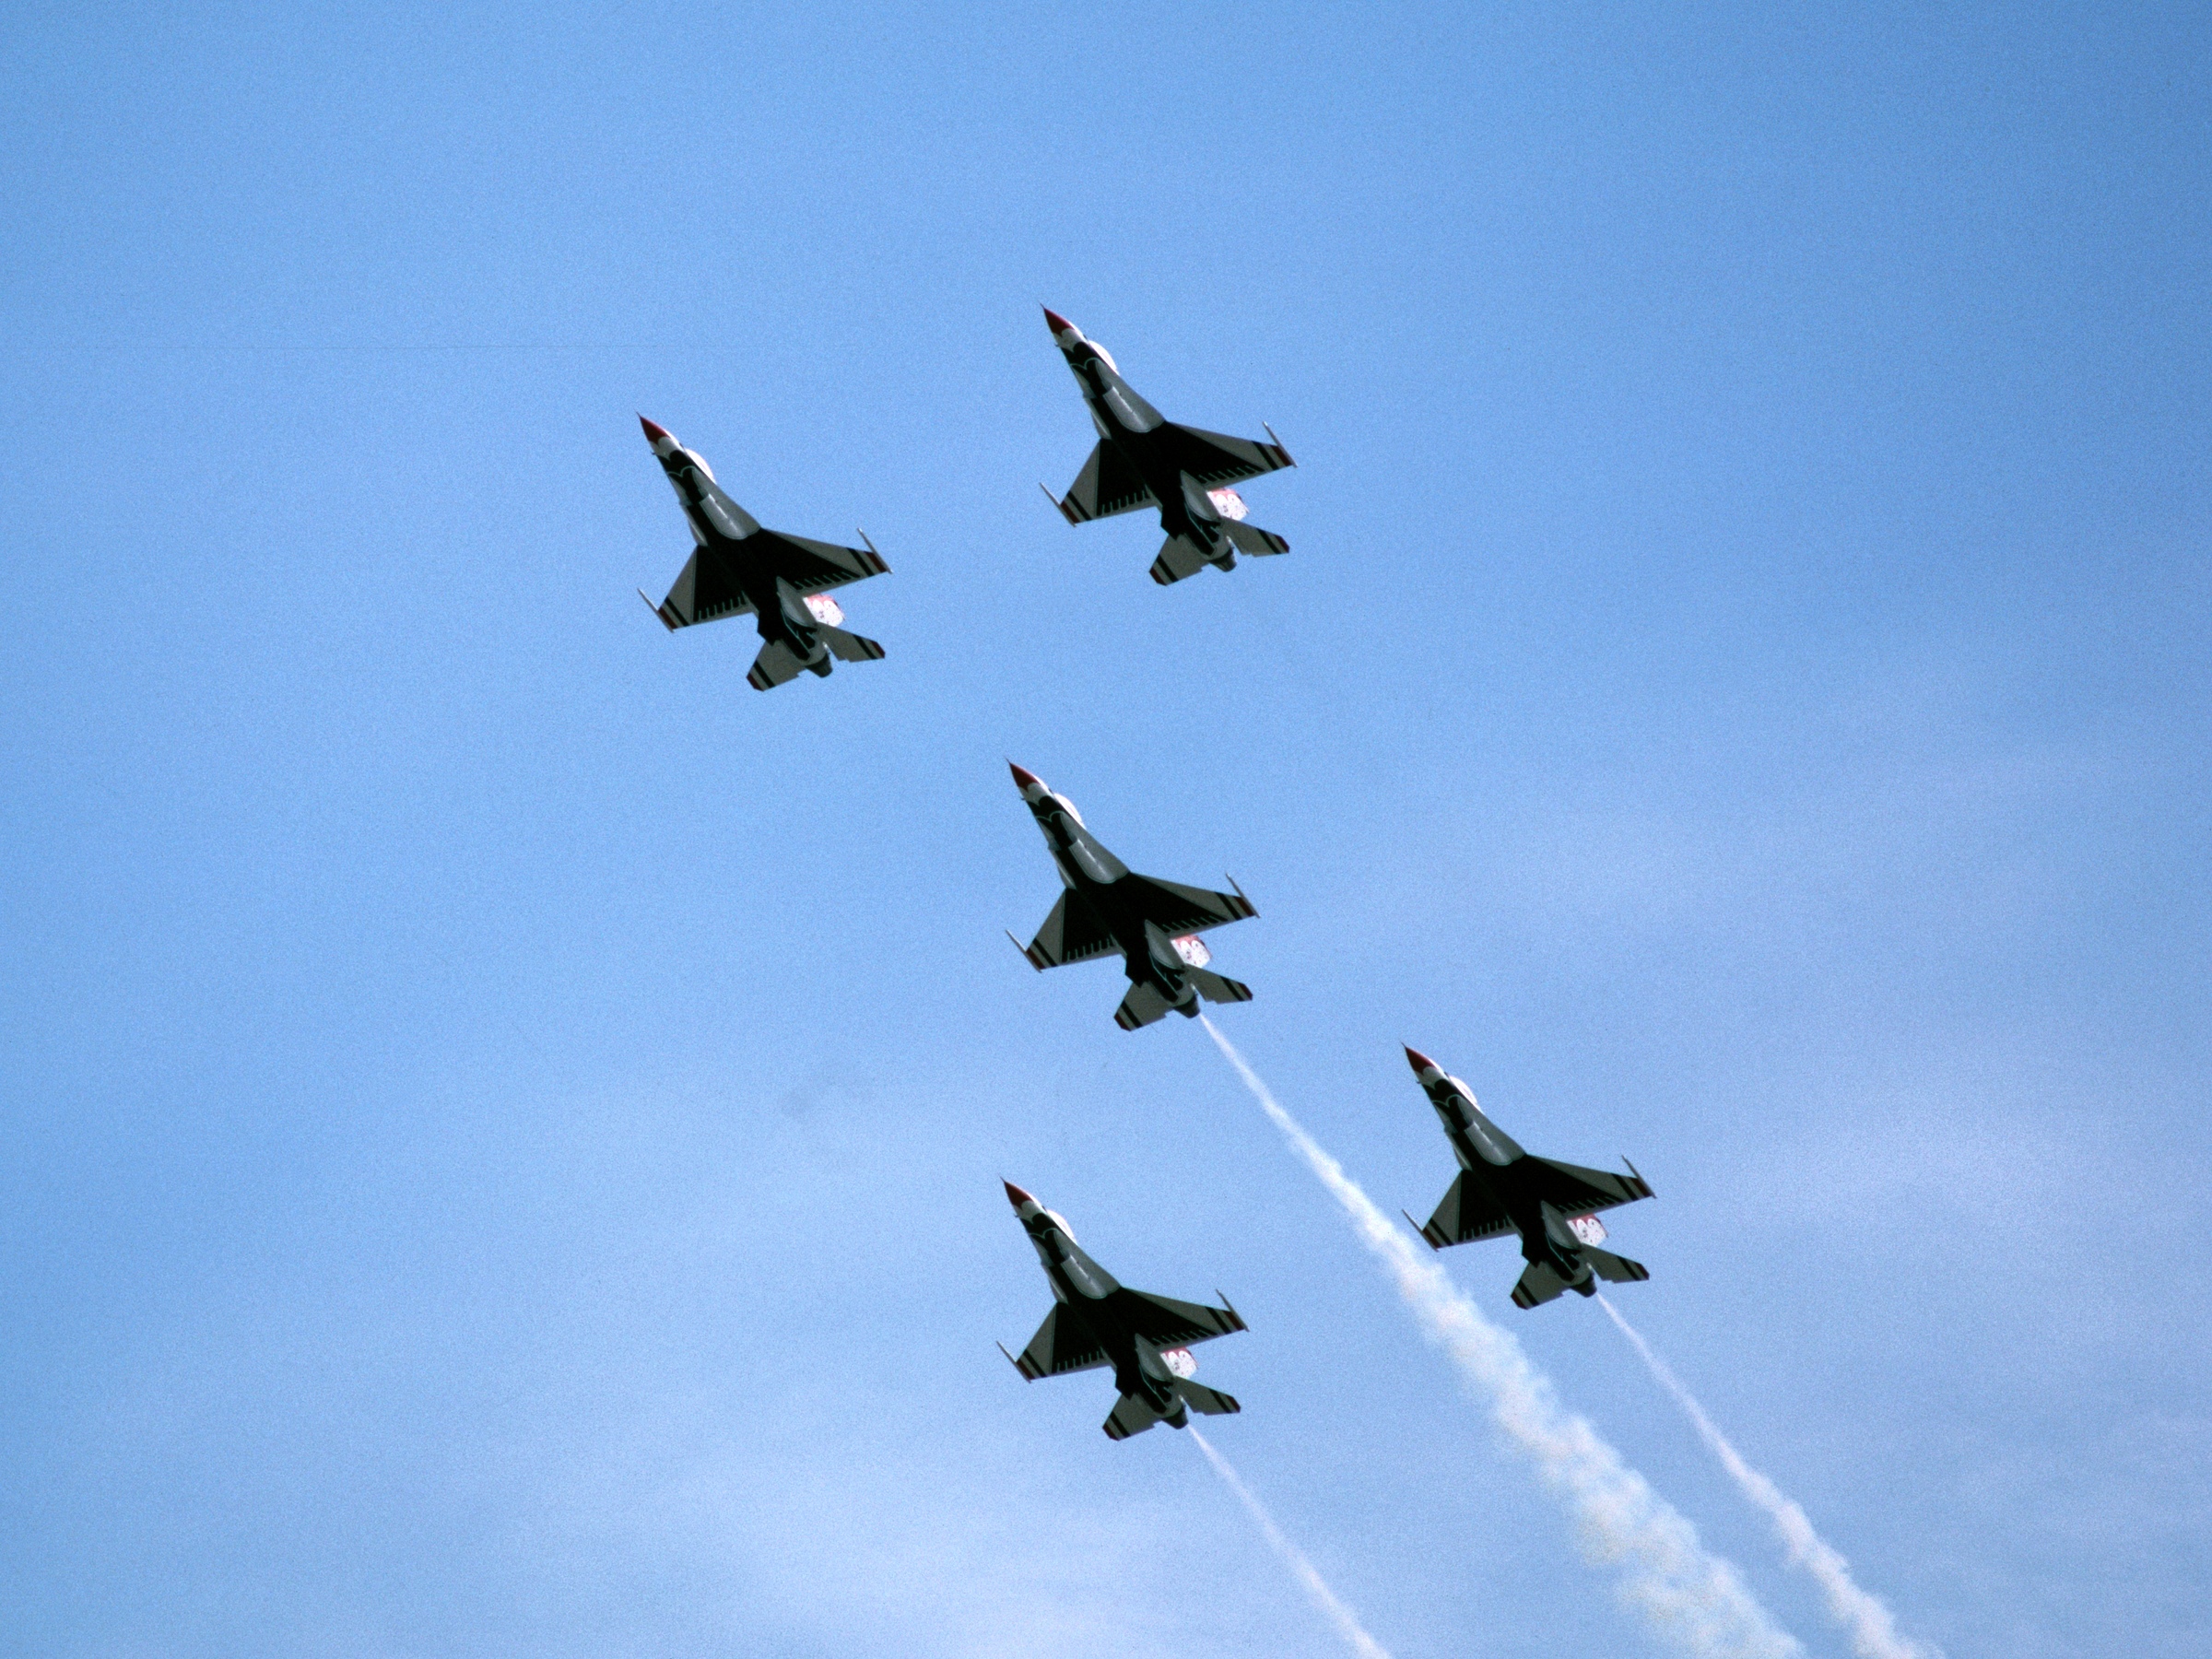 A photo of 5 fighter jets in the sky